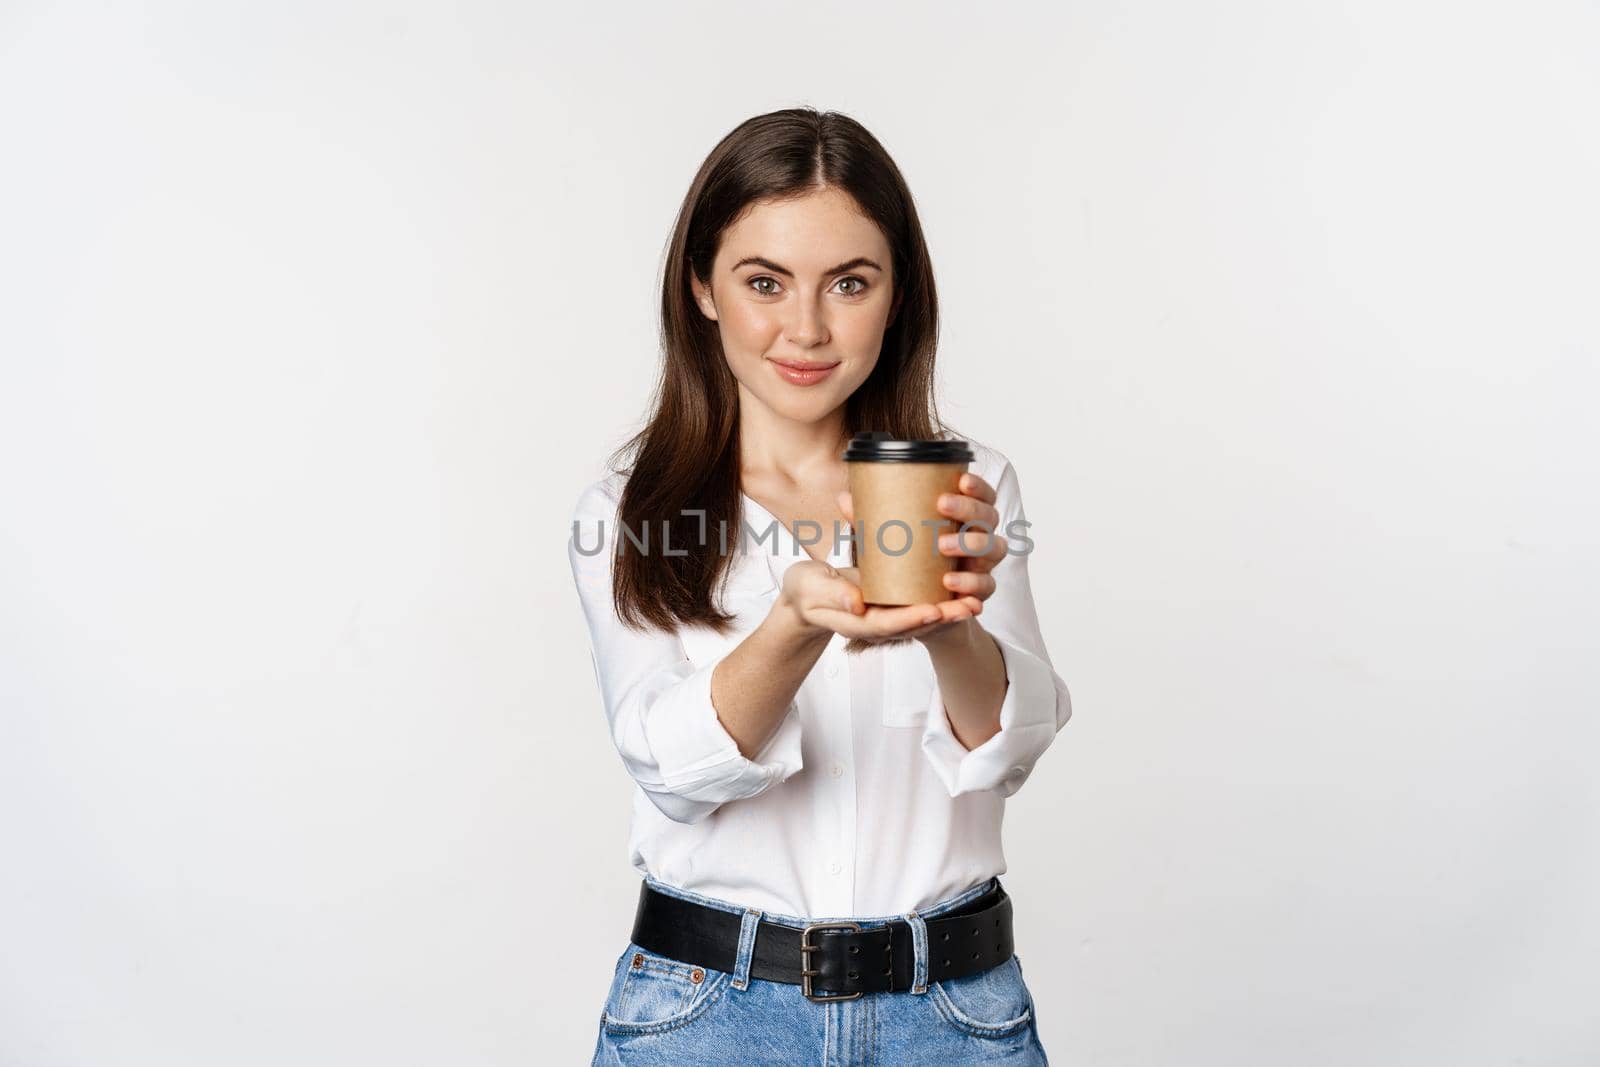 Image of modern woman, office lady holding takeaway coffee cup and smiling, standing over white background.